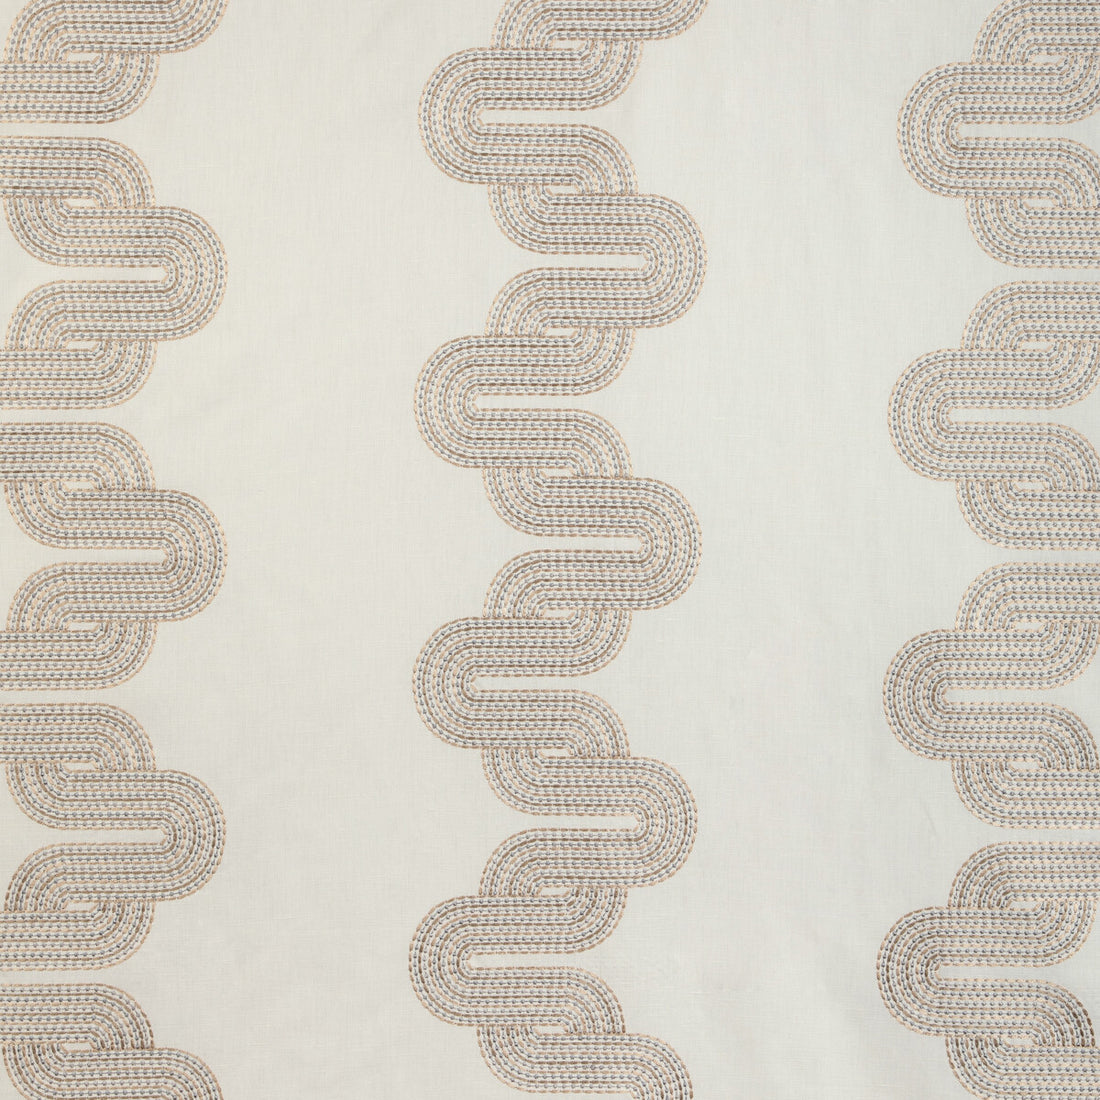 Cloud Chain fabric in opal color - pattern 36943.16.0 - by Kravet Design in the Alexa Hampton collection